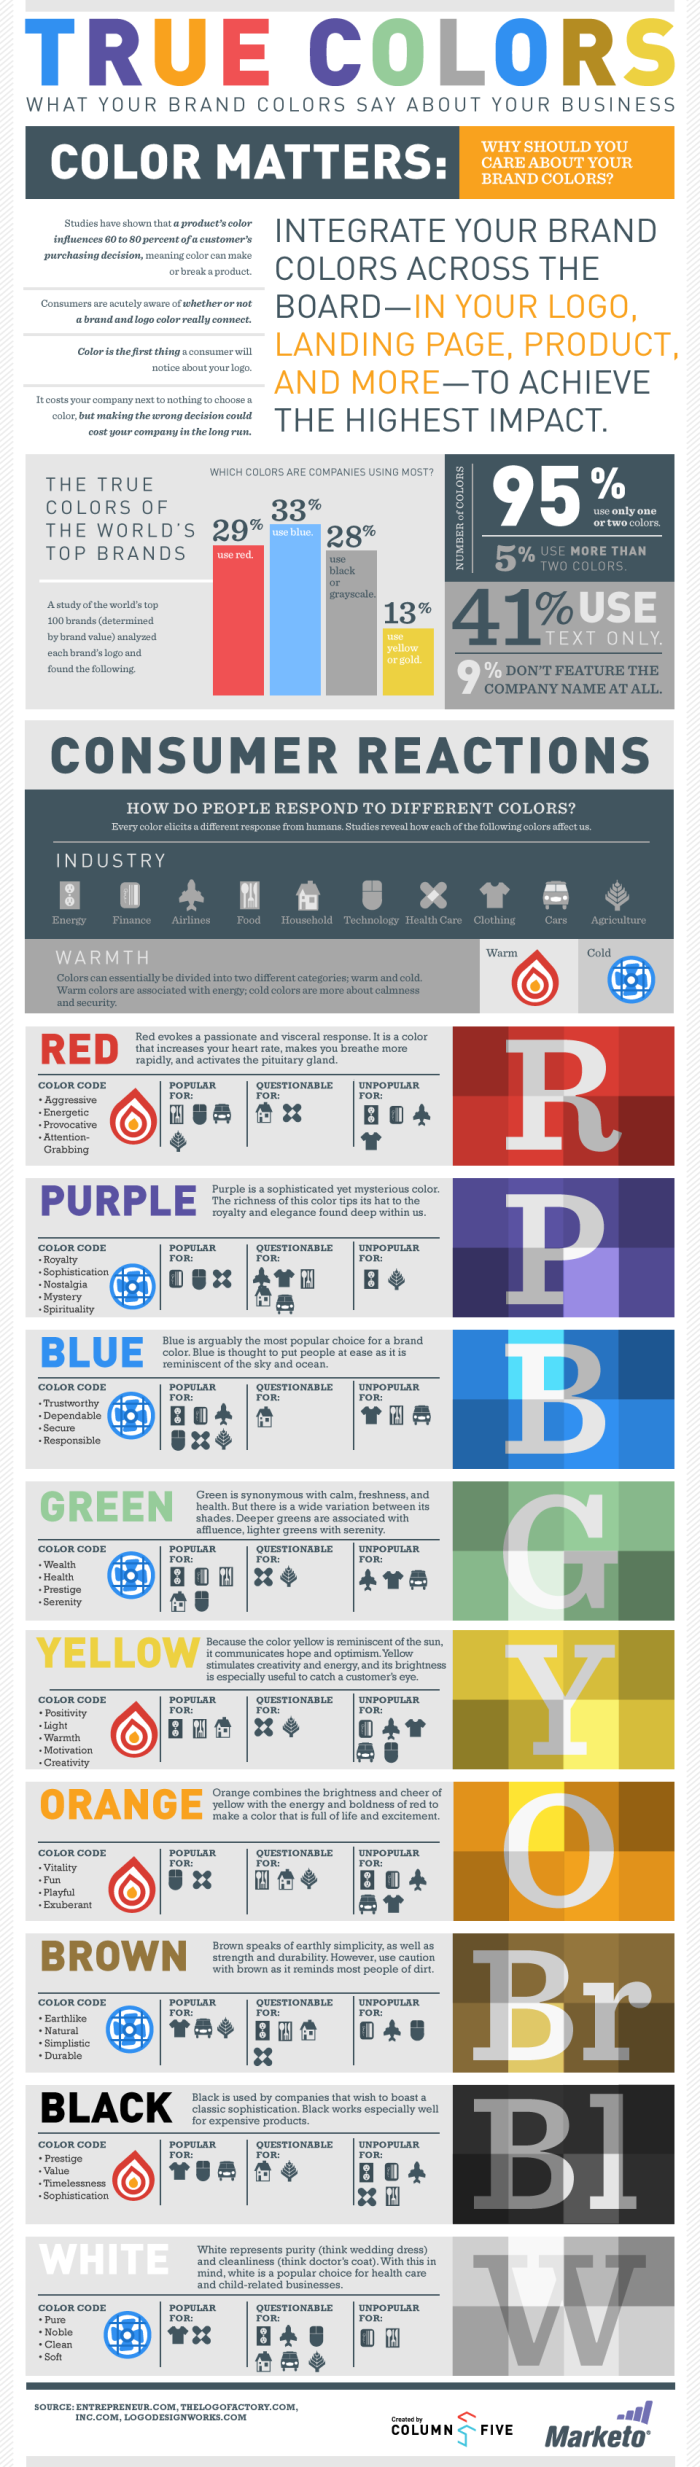 true-colors-what-your-brand-colors-say-about-your-business_5029198e9f365